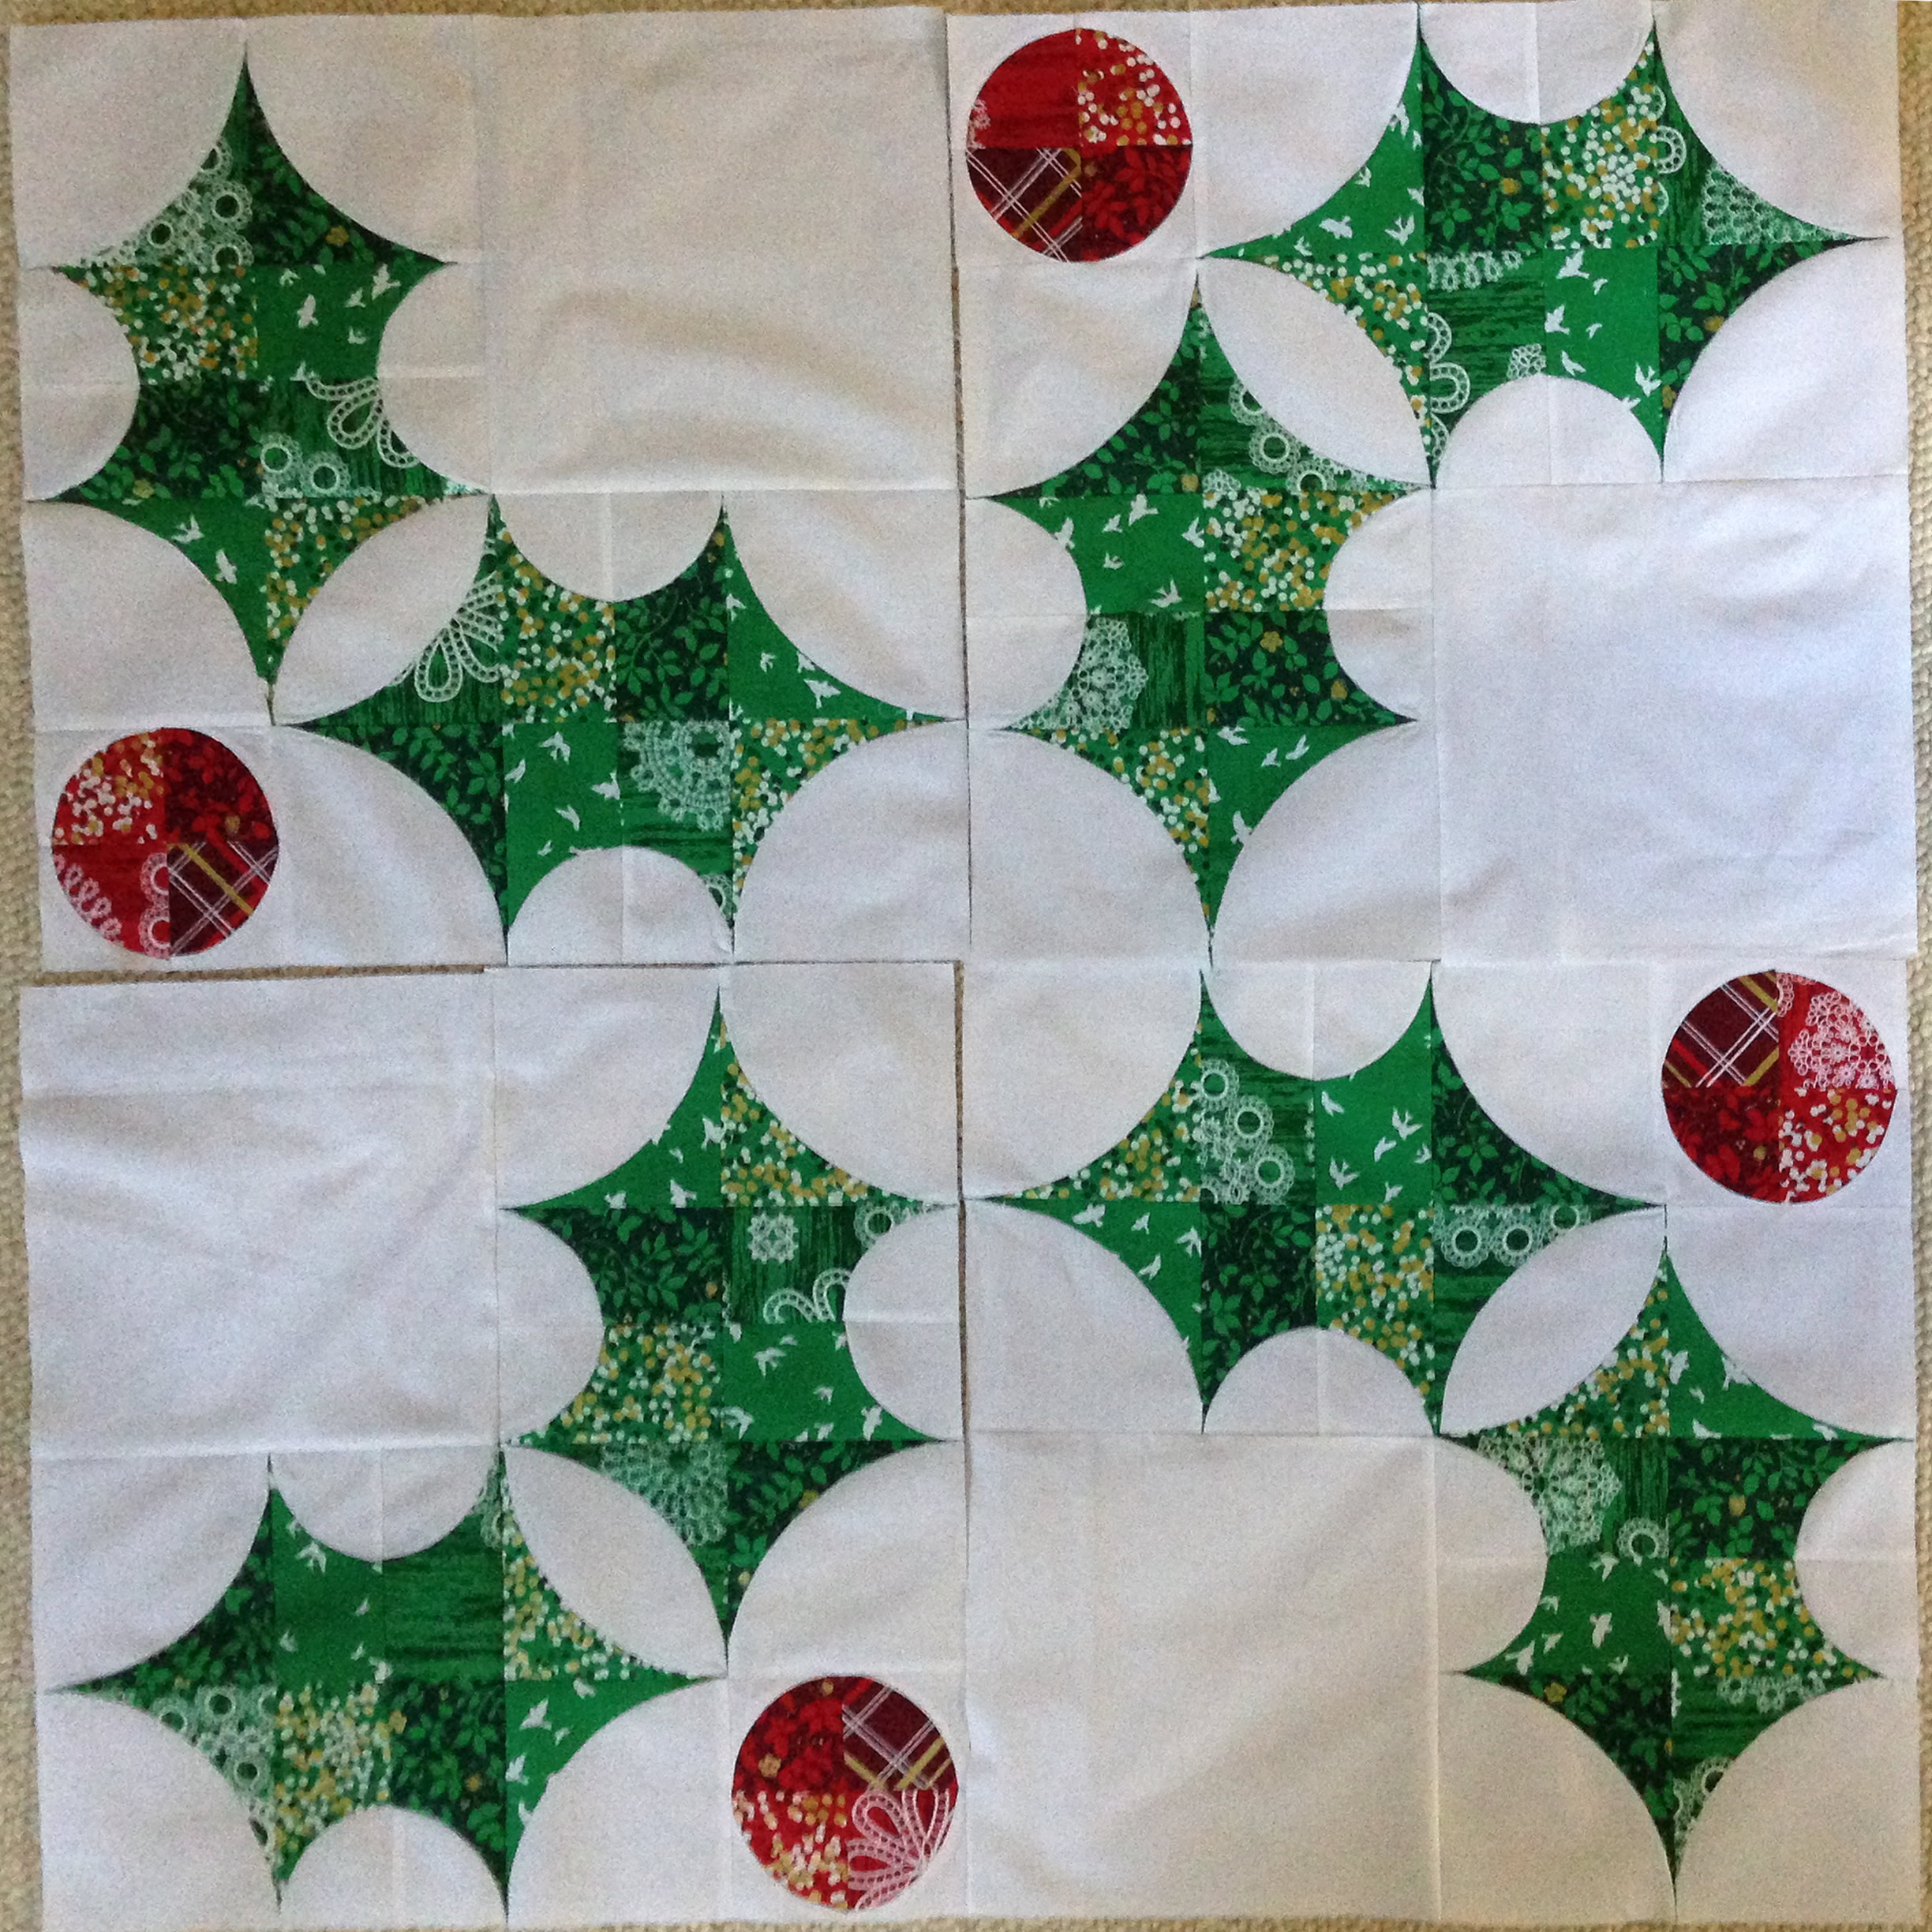 The Holly Holiday Quilt 55 x 55 Quilt Foundation Paper Piecing Pattern